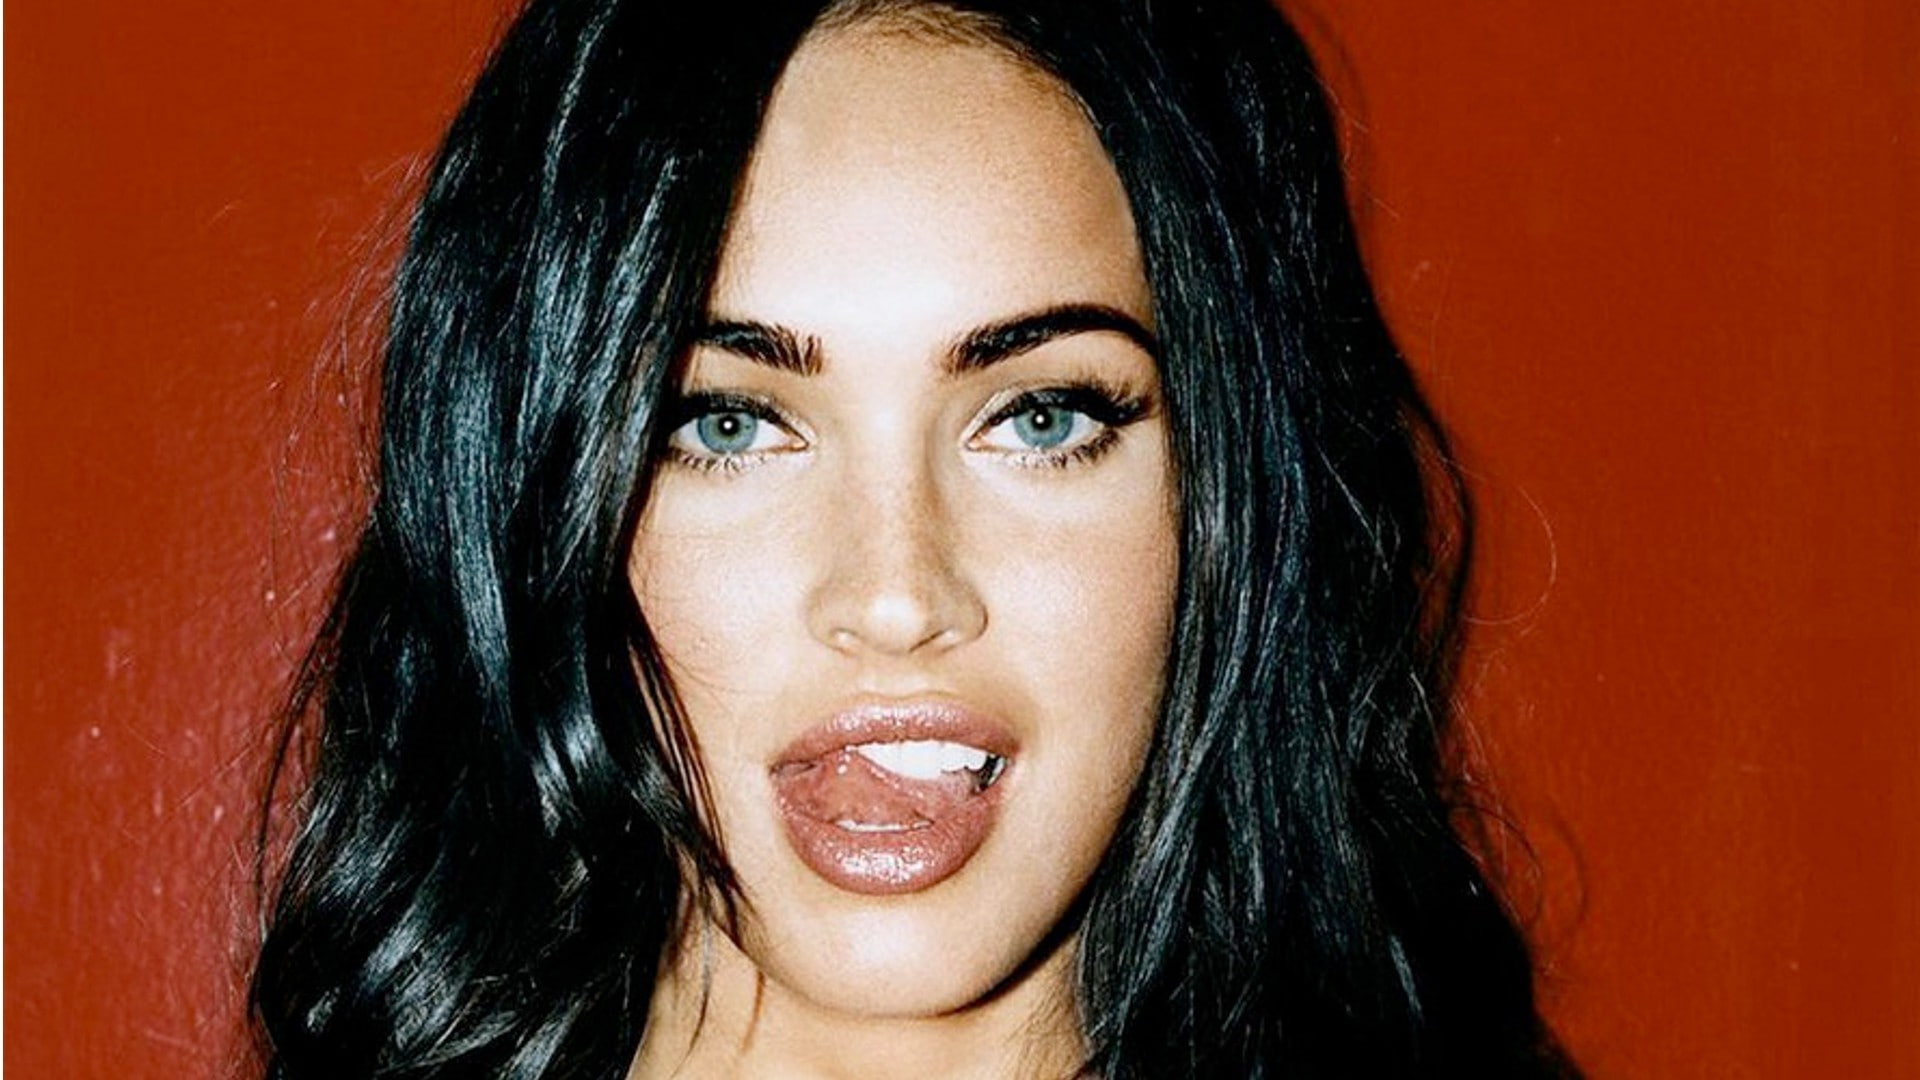 Megan Fox, portrait, one person, looking at camera, front view